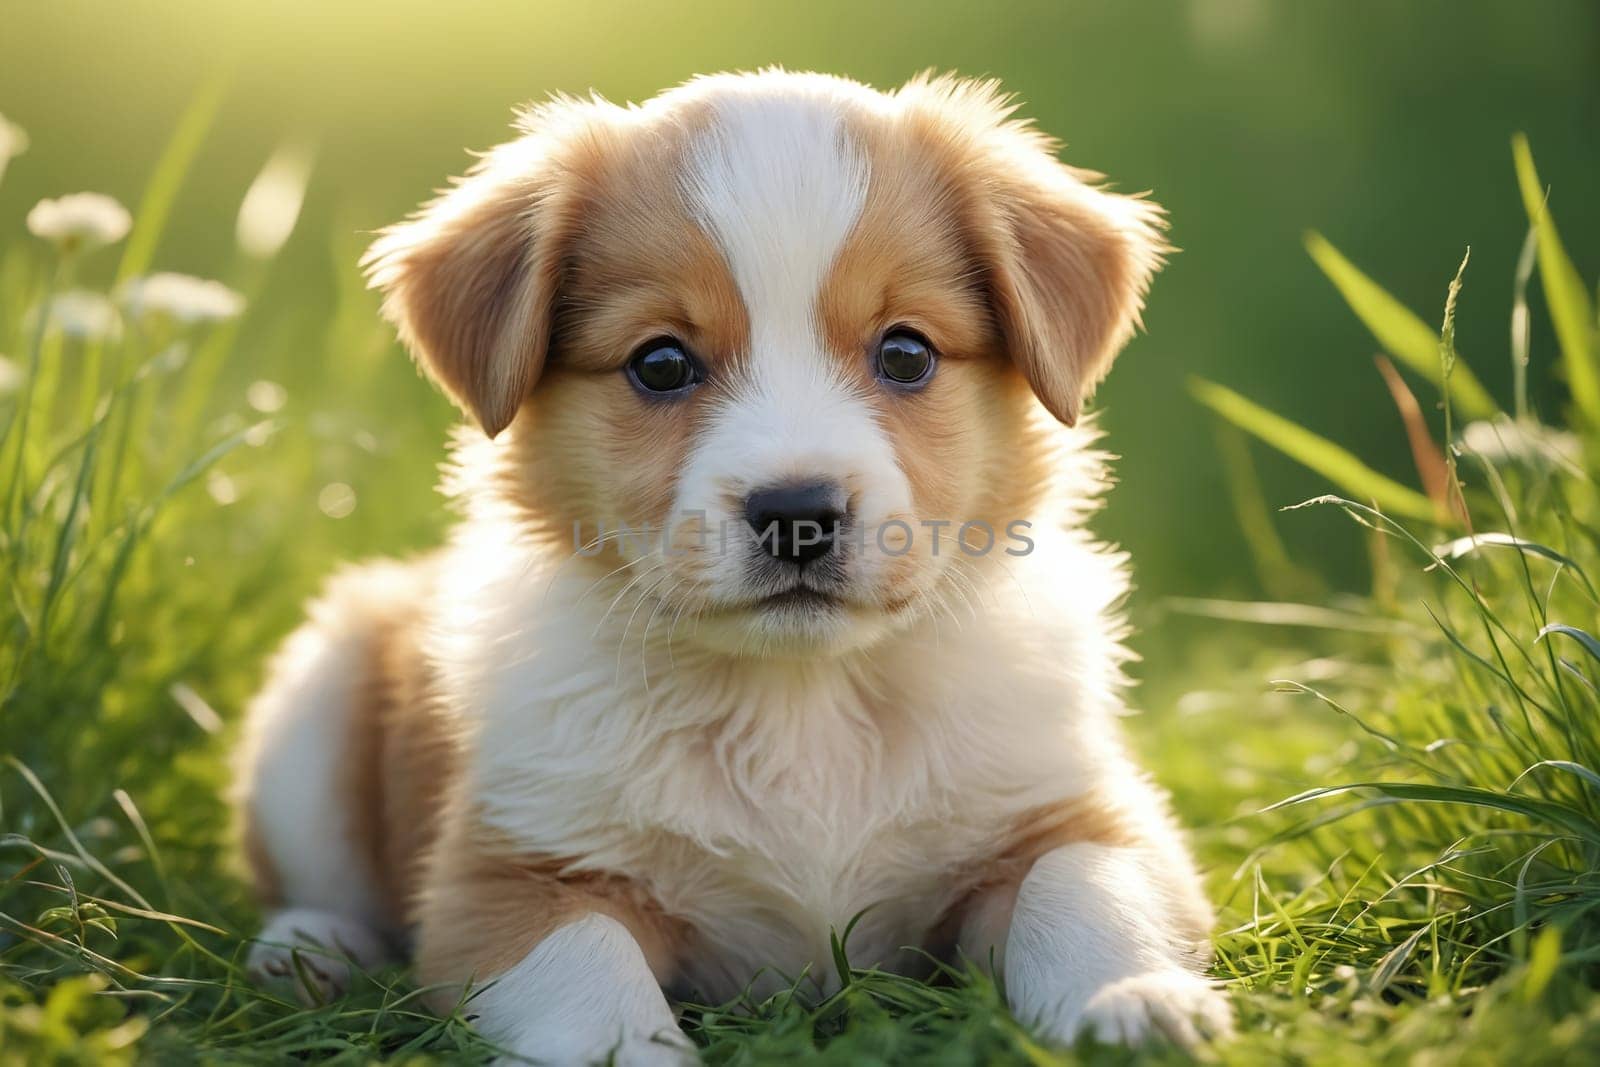 A fluffy puppy basks in the warm glow of the sun amid verdant meadow grass.